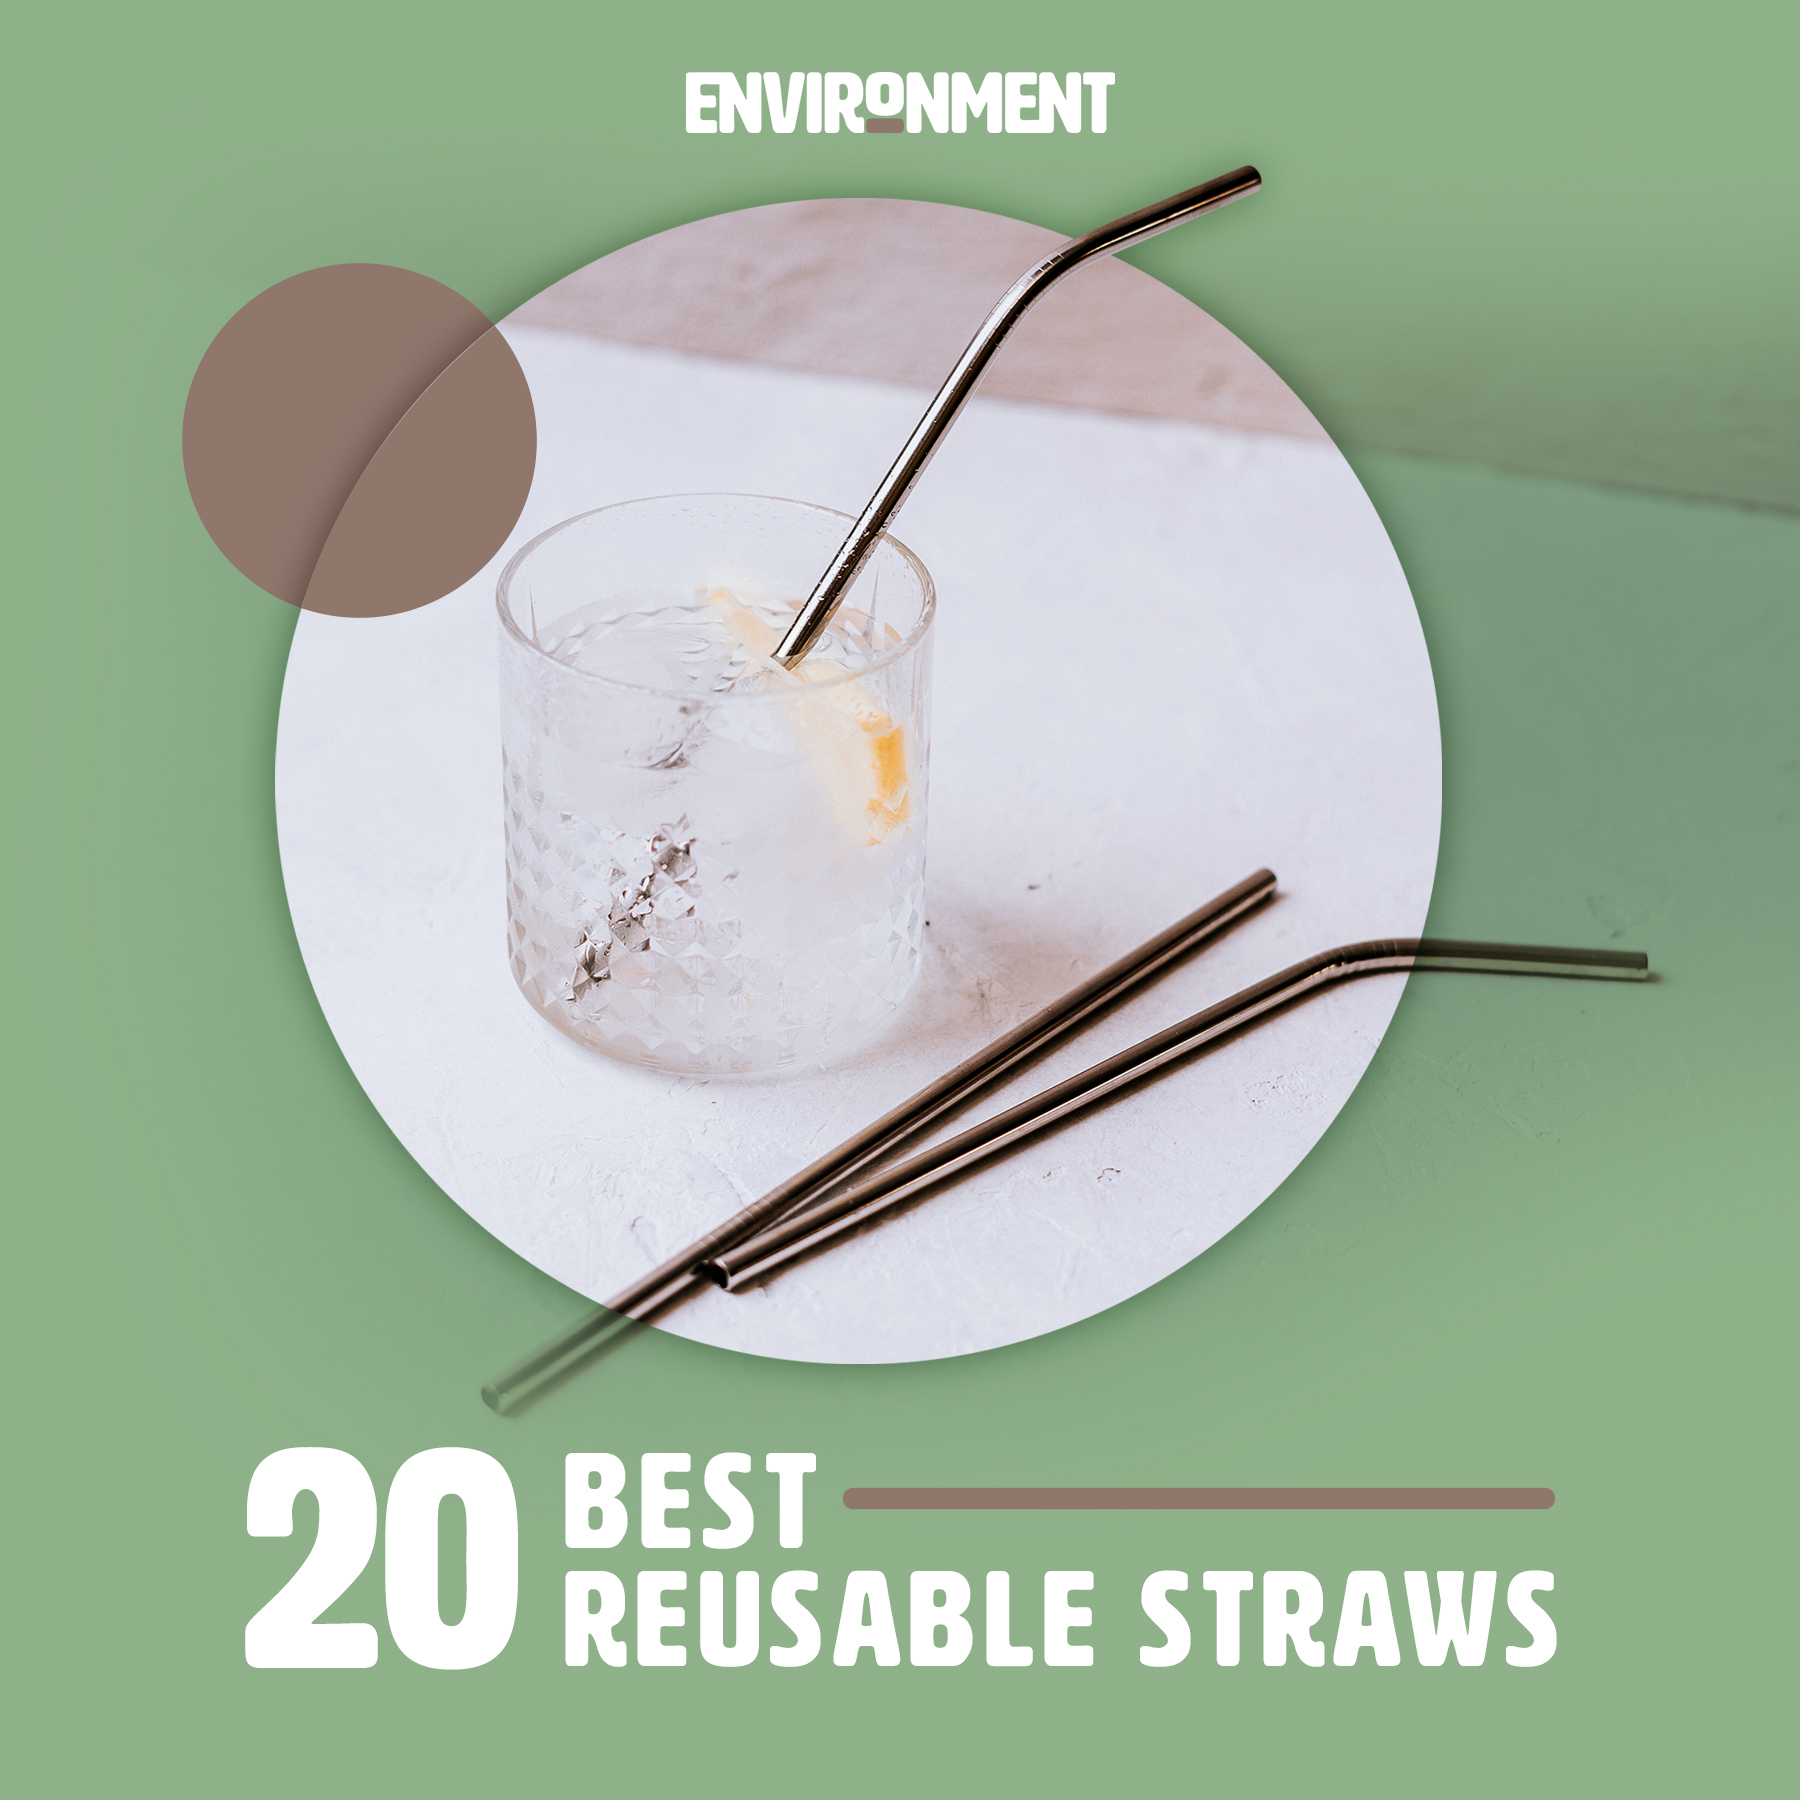 5-inch Reusable Stainless Steel Drink Straws: Perfect for Restaurants 2-CT and Cafes Restaurantware Bars Short Silver Cocktail Straw Safe Rounded Design Suitable for Child Use